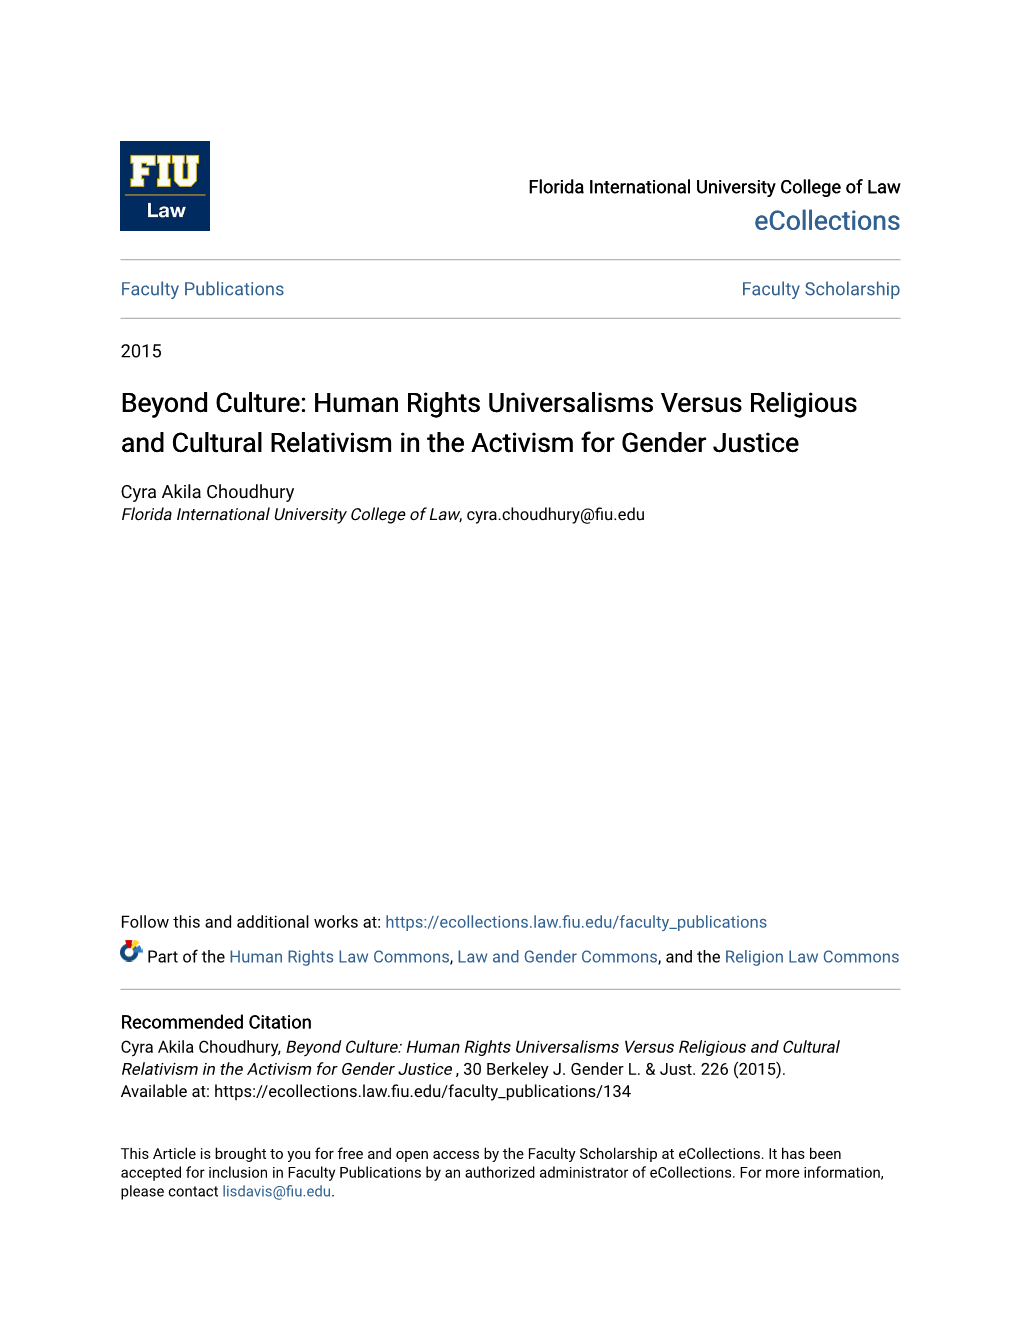 Human Rights Universalisms Versus Religious and Cultural Relativism in the Activism for Gender Justice